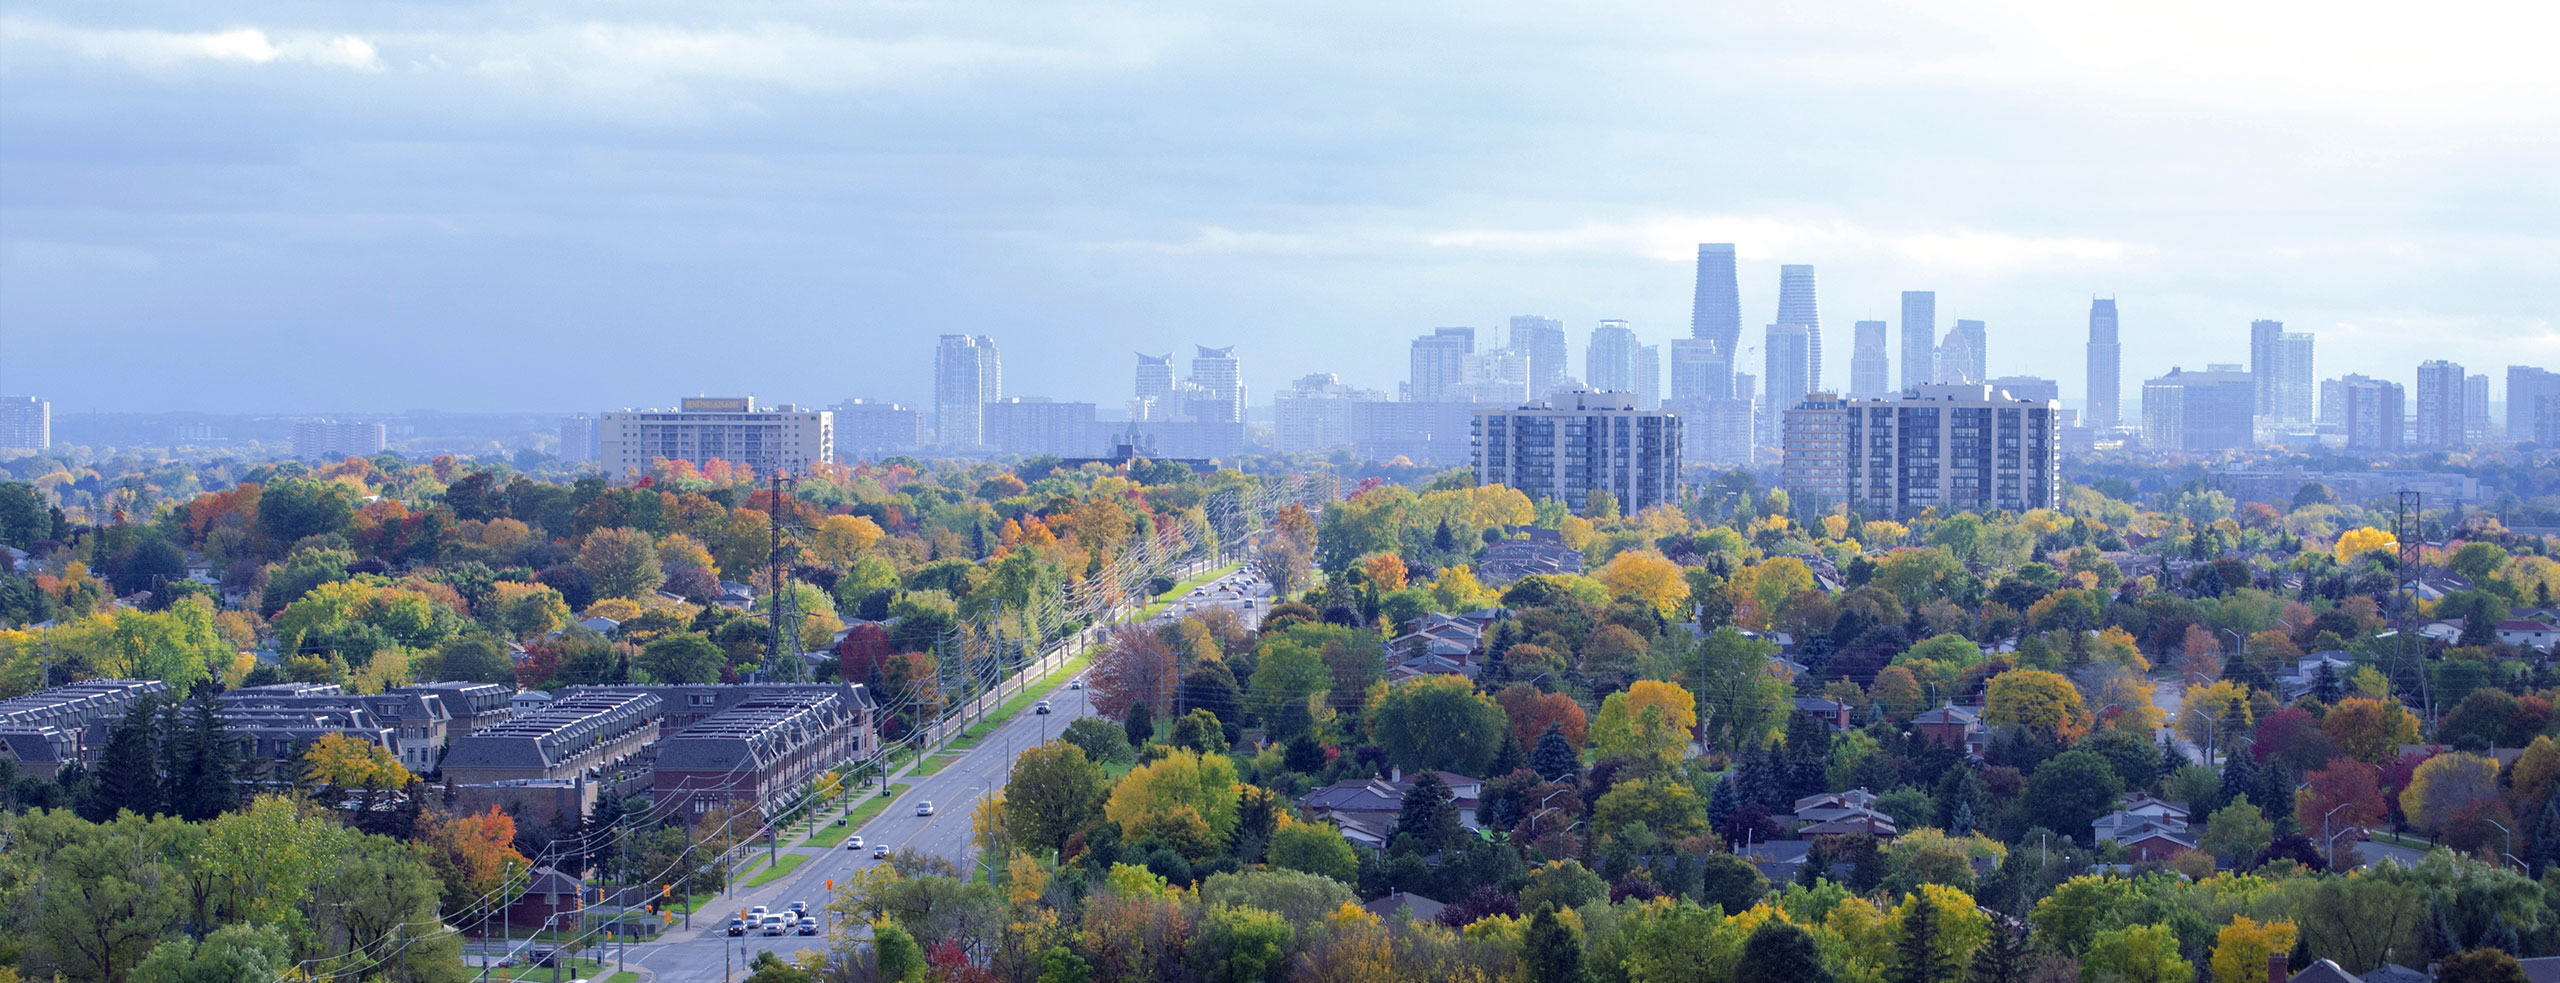 The city of Mississauga, Ontario, Canada during the day